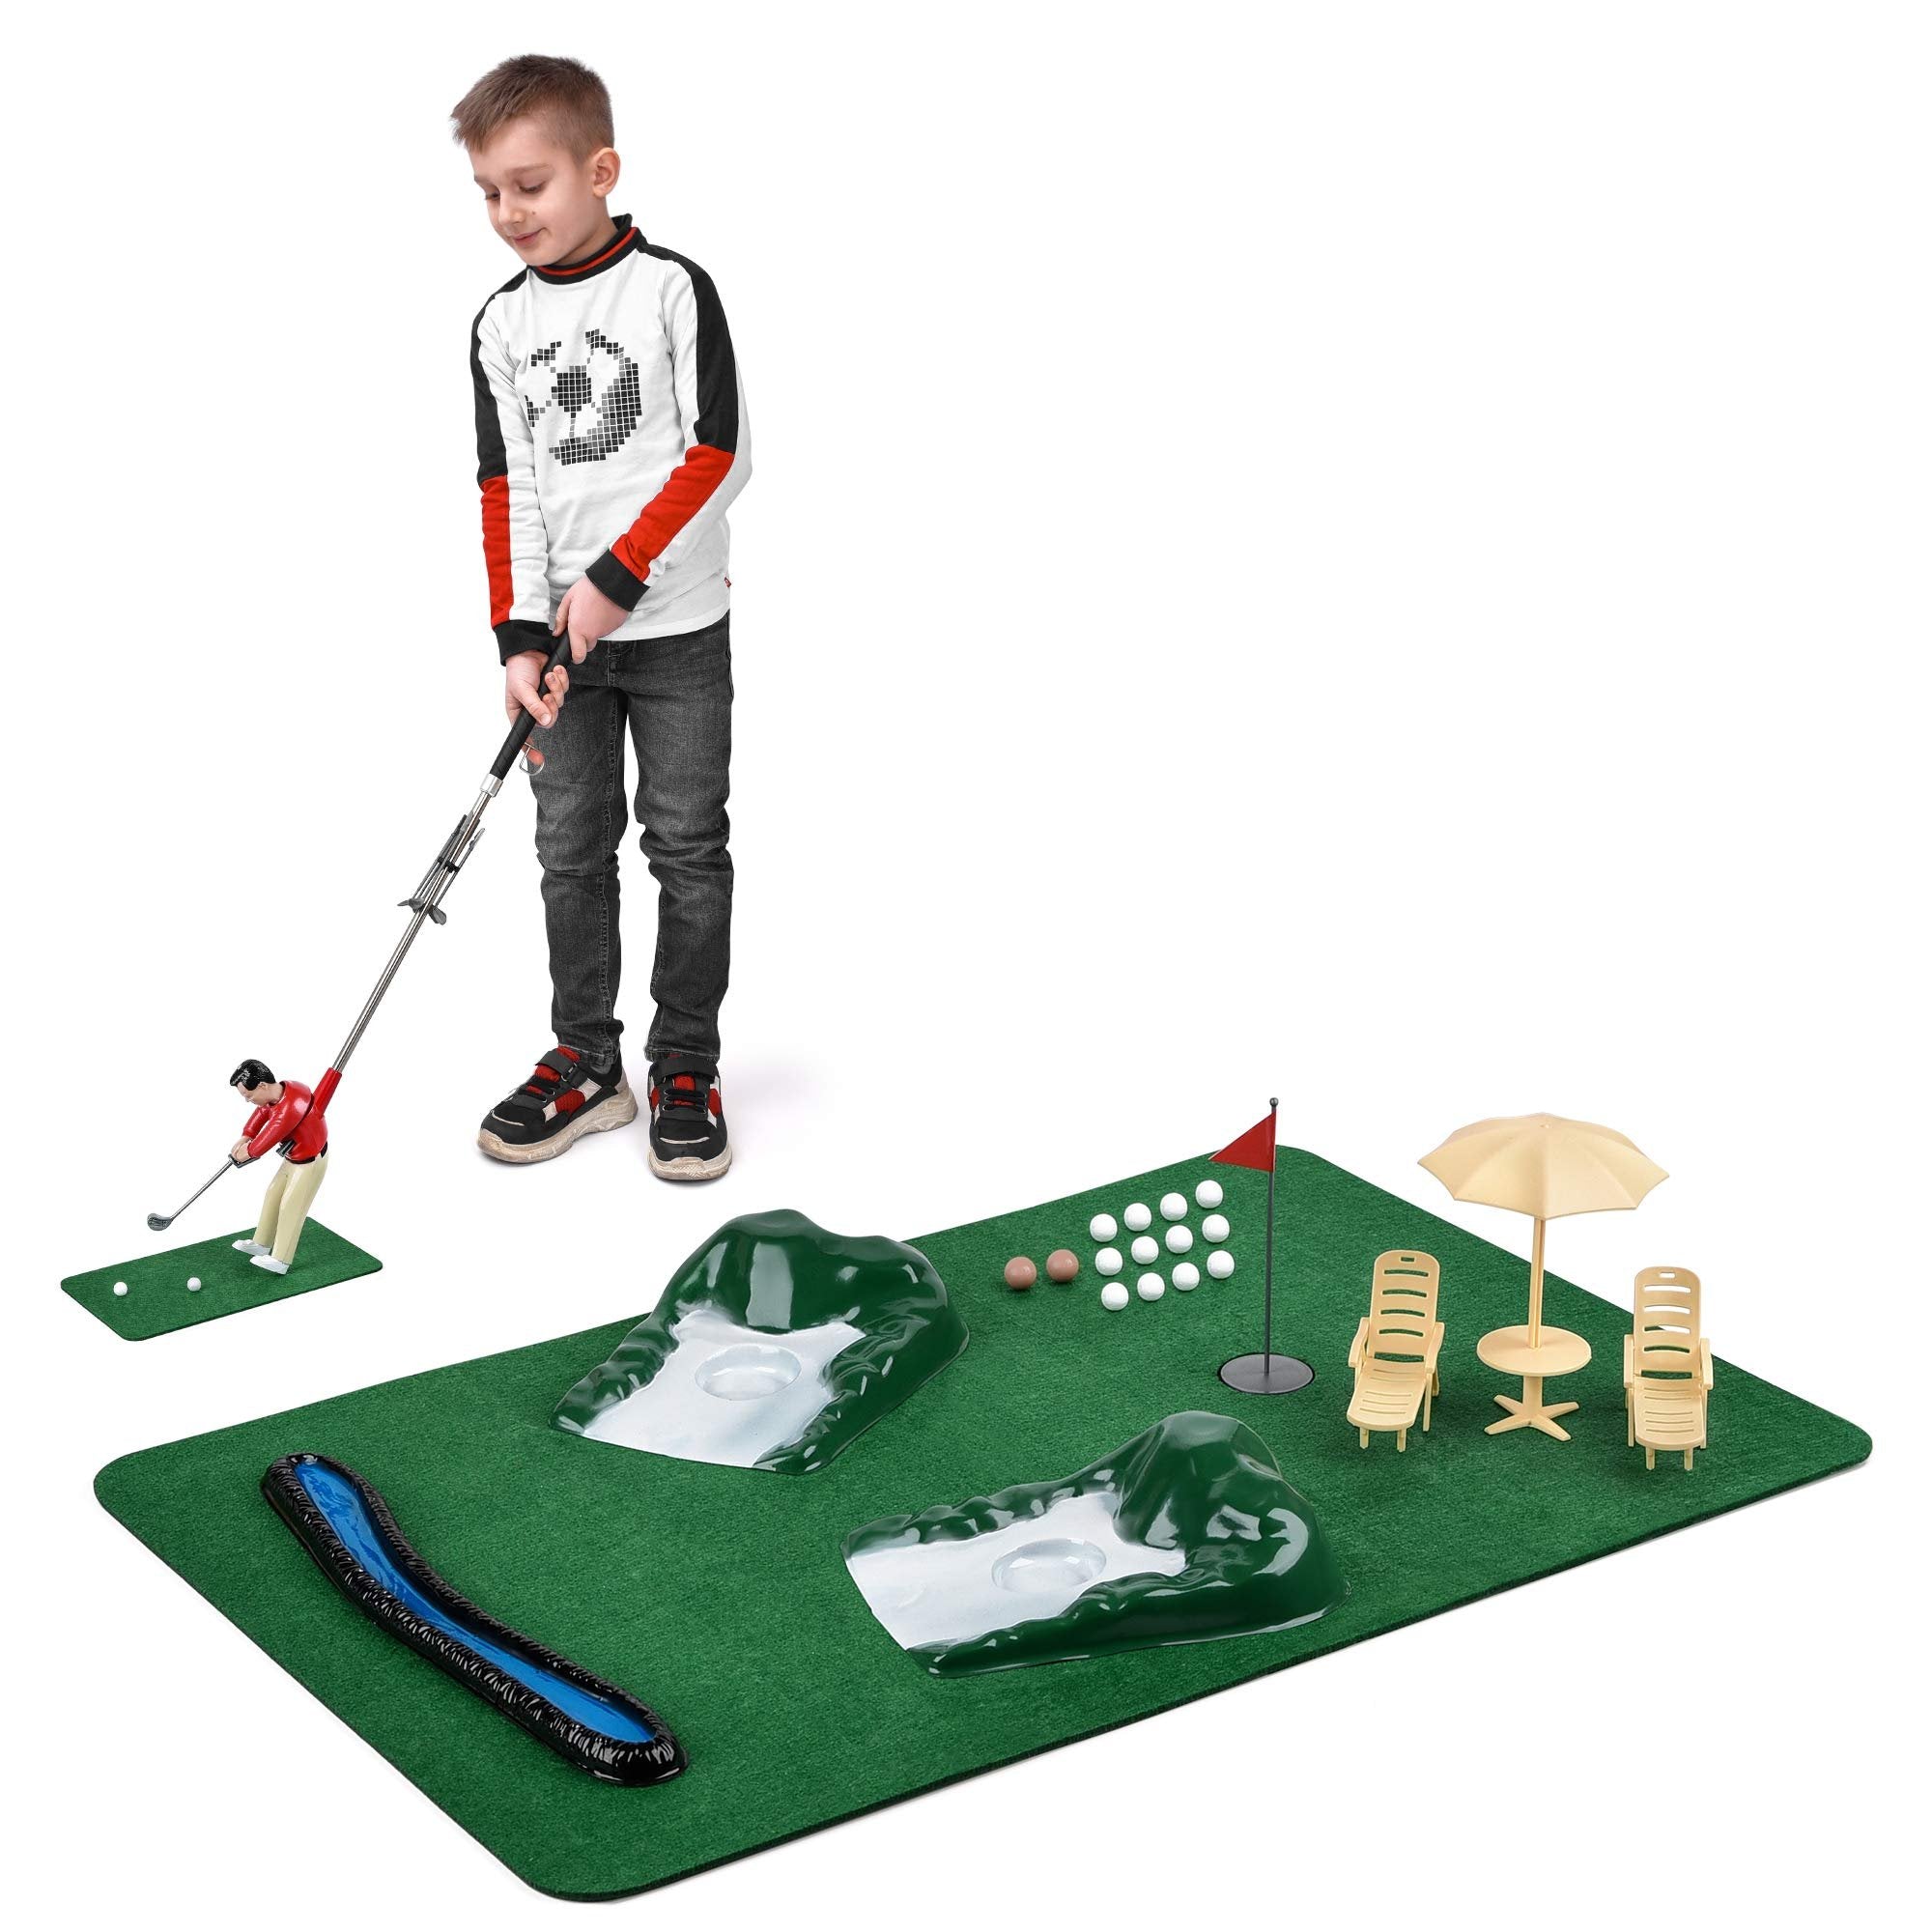 Abco Tech Mini Golfing Man Indoor Golf Kit - Golf Course Backyard Set - Complete Mini Golf for Home - Easy to Set Up and Play - Lightweight & Compact - Portable Mini-Golf Course